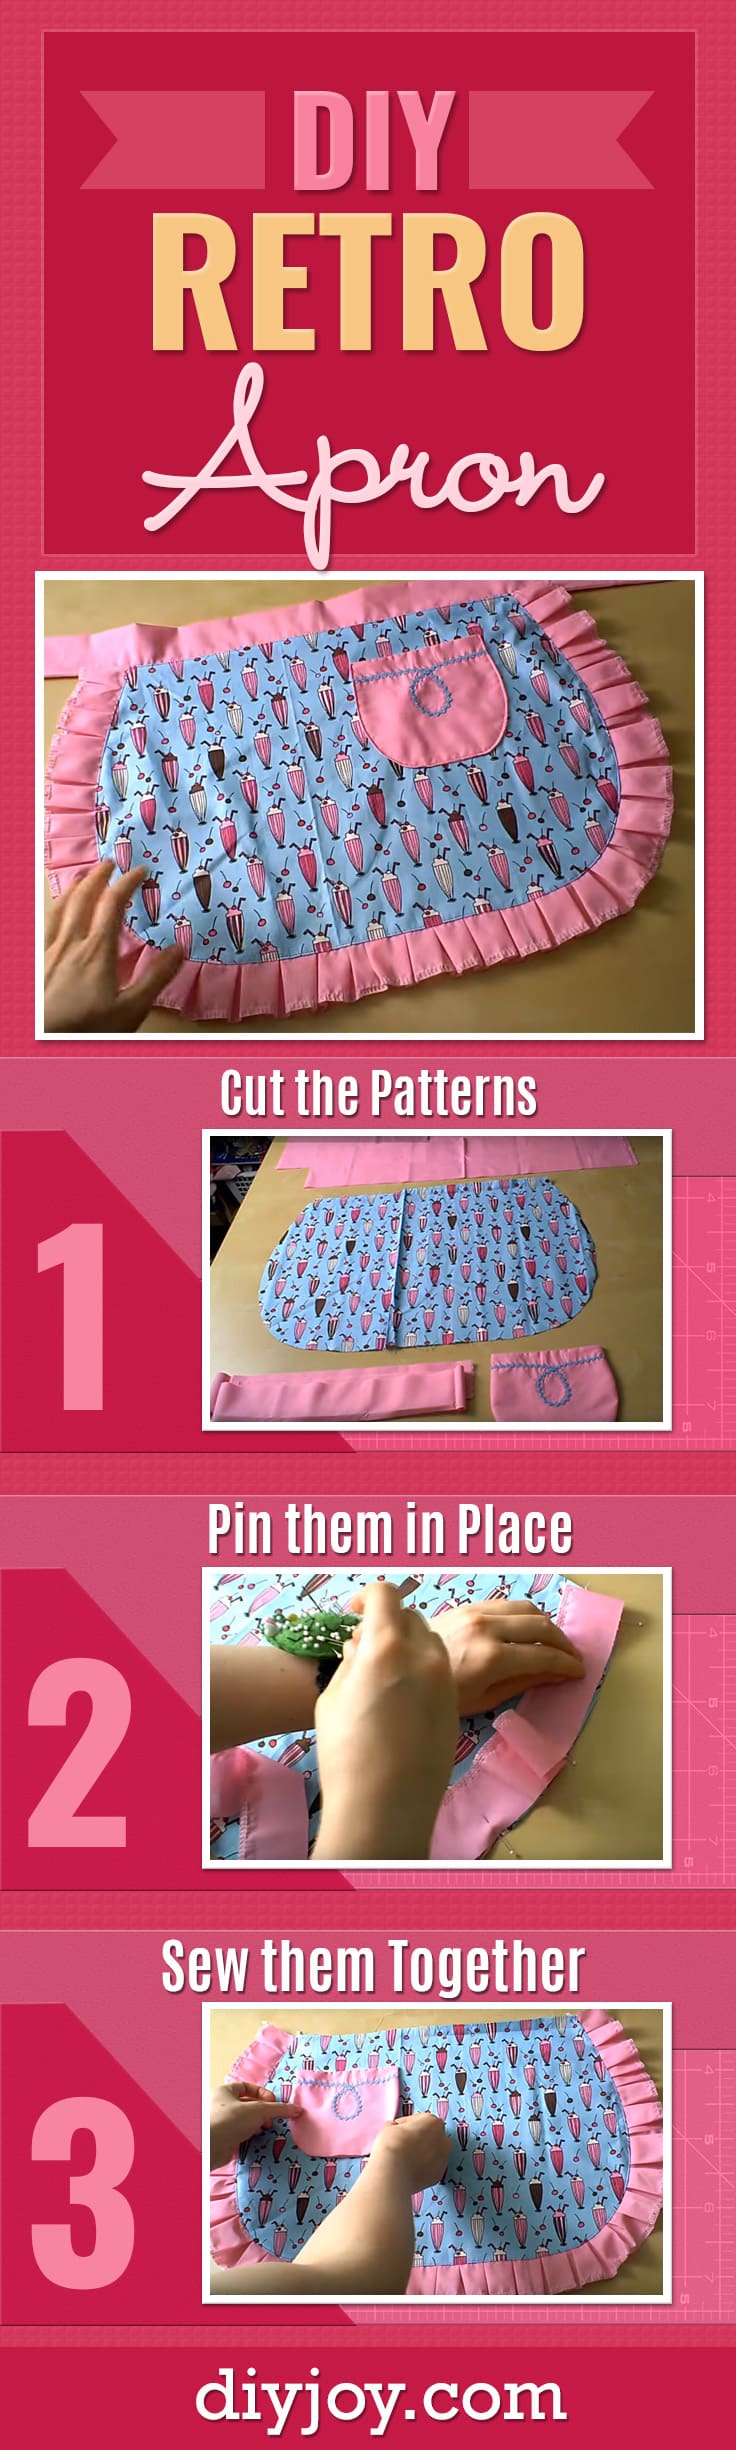 Easy Sewing Projects - Retro Apron Tutorials - Free Pattern and Video Tutorial for Making an Apron - Cheap DIY Gift Ideas for Her - Cute Ideas for The Kitchen